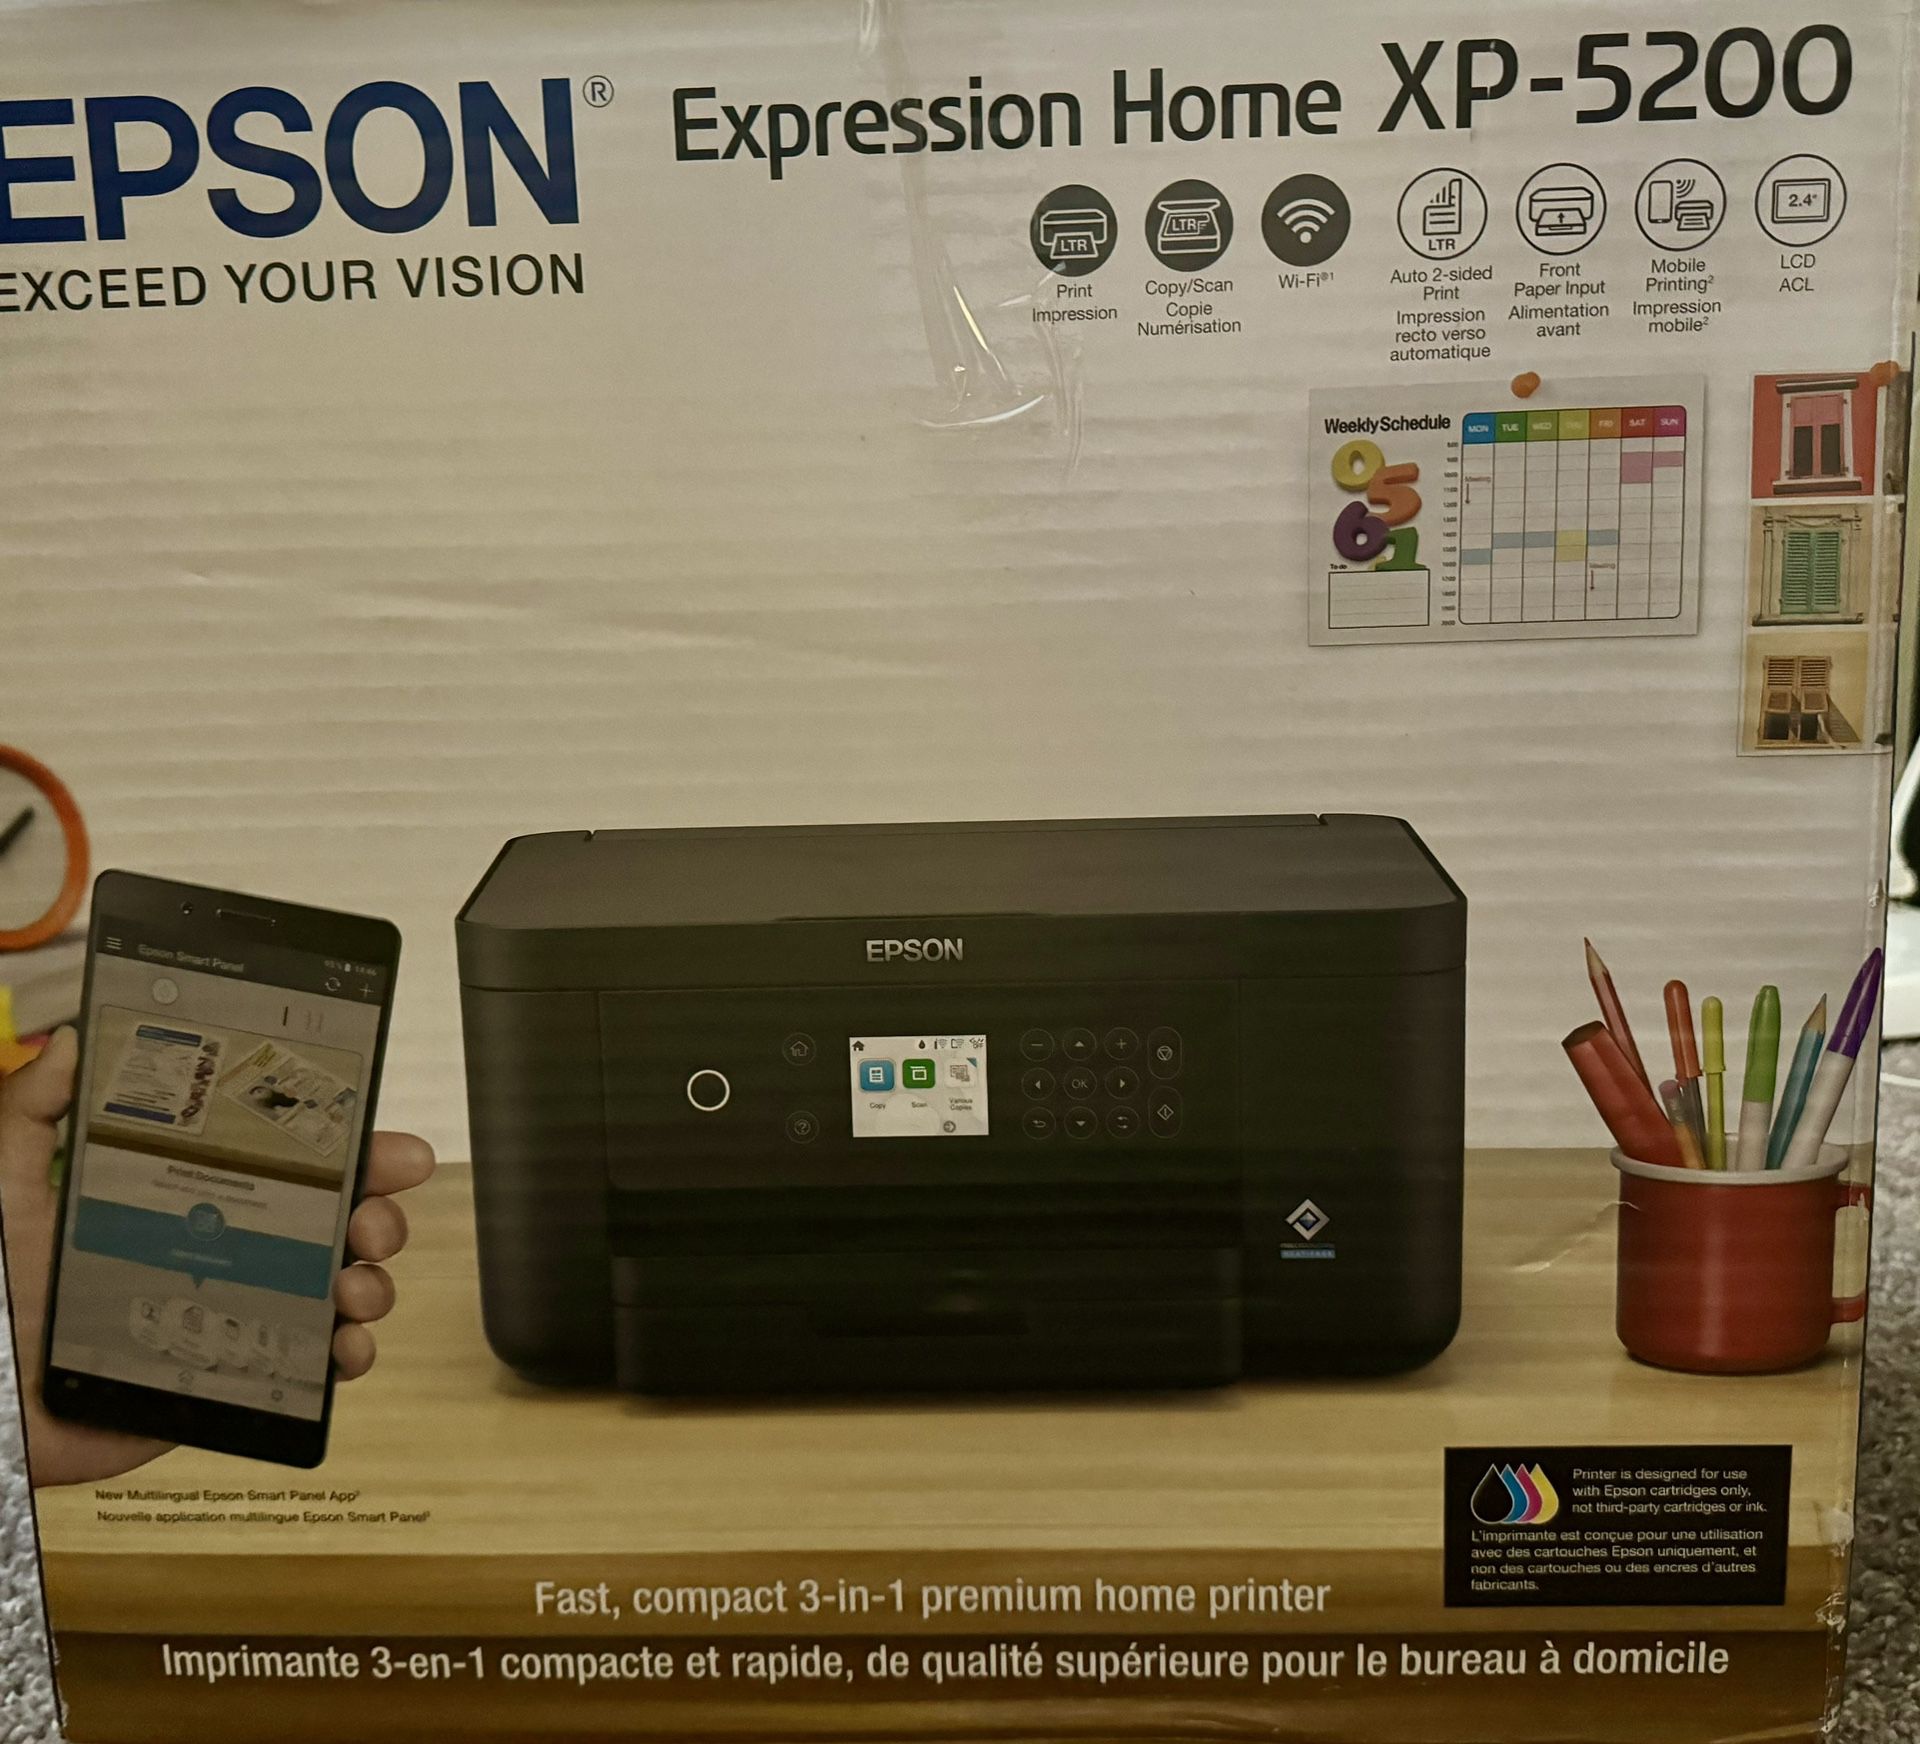 BRAND NEW - Epson Expression Home XP-5200 Wireless Color Inkjet All-in-One Printer with Scan and Copy